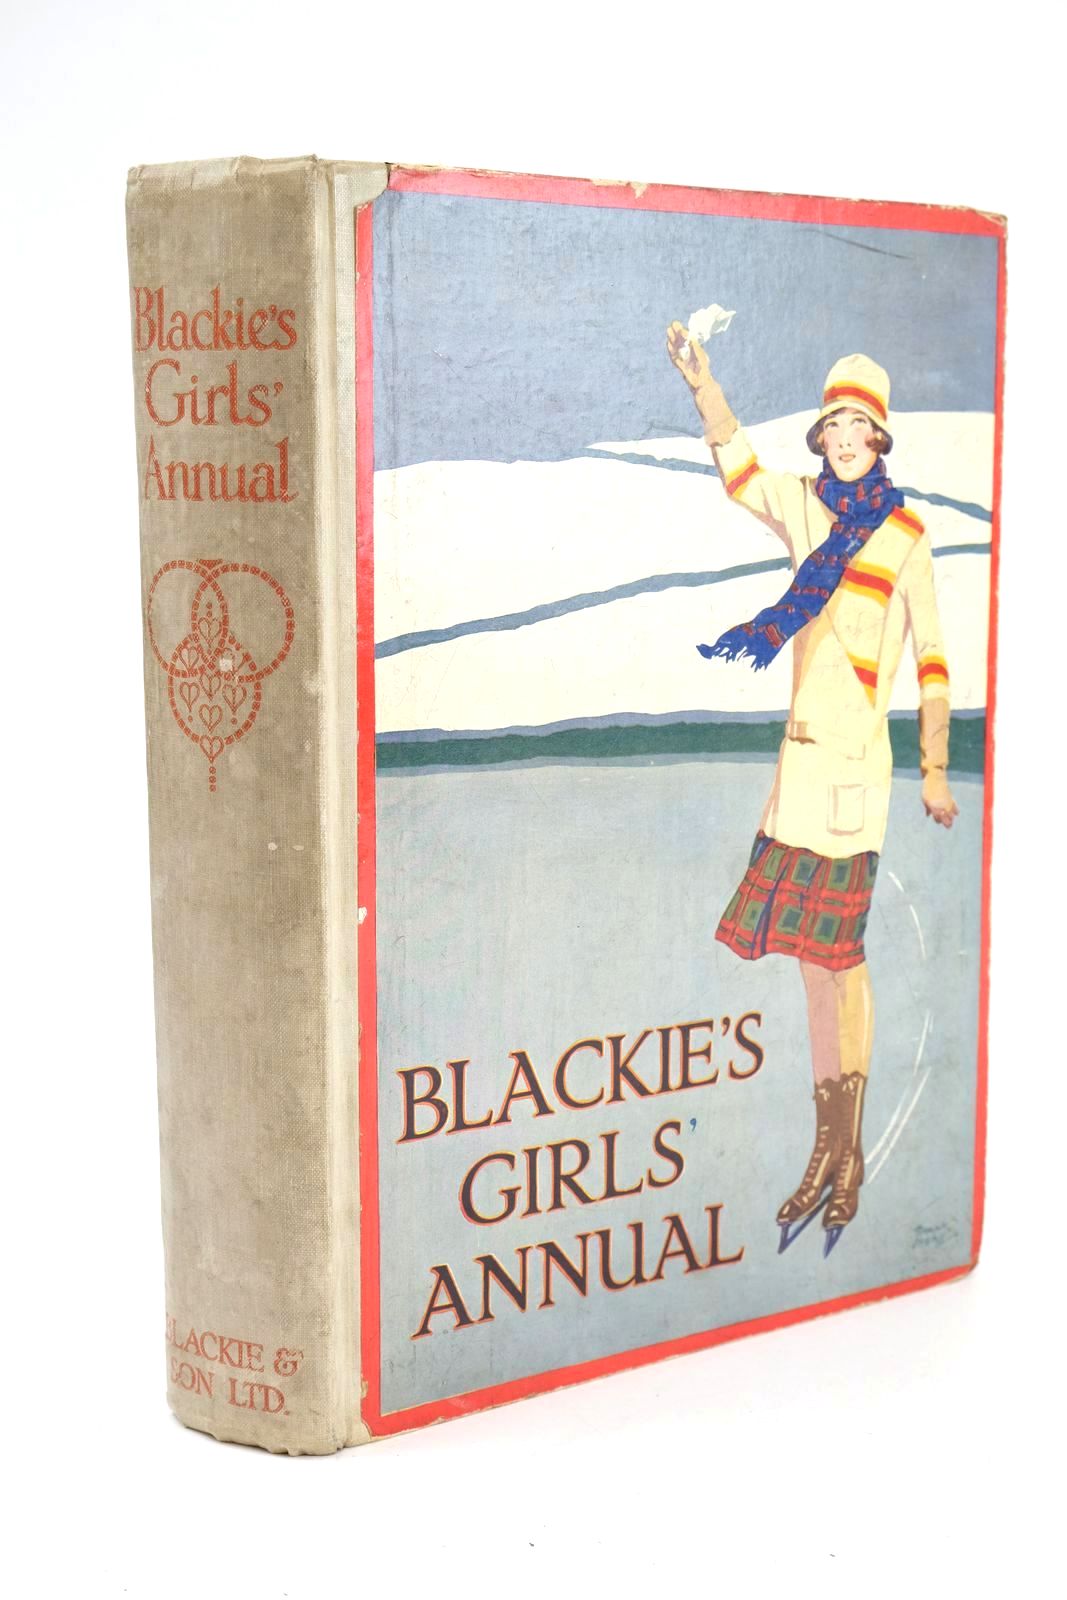 Photo of BLACKIE'S GIRLS' ANNUAL written by Joan, Natalie
Harrison, Florence
Bickersteth, Lucy
Middleton, Margaret
et al, illustrated by Wiles, Frank E.
Harrison, Florence
Wilson, Radcliffe
Brock, C.E.
et al., published by Blackie & Son Ltd. (STOCK CODE: 1324978)  for sale by Stella & Rose's Books